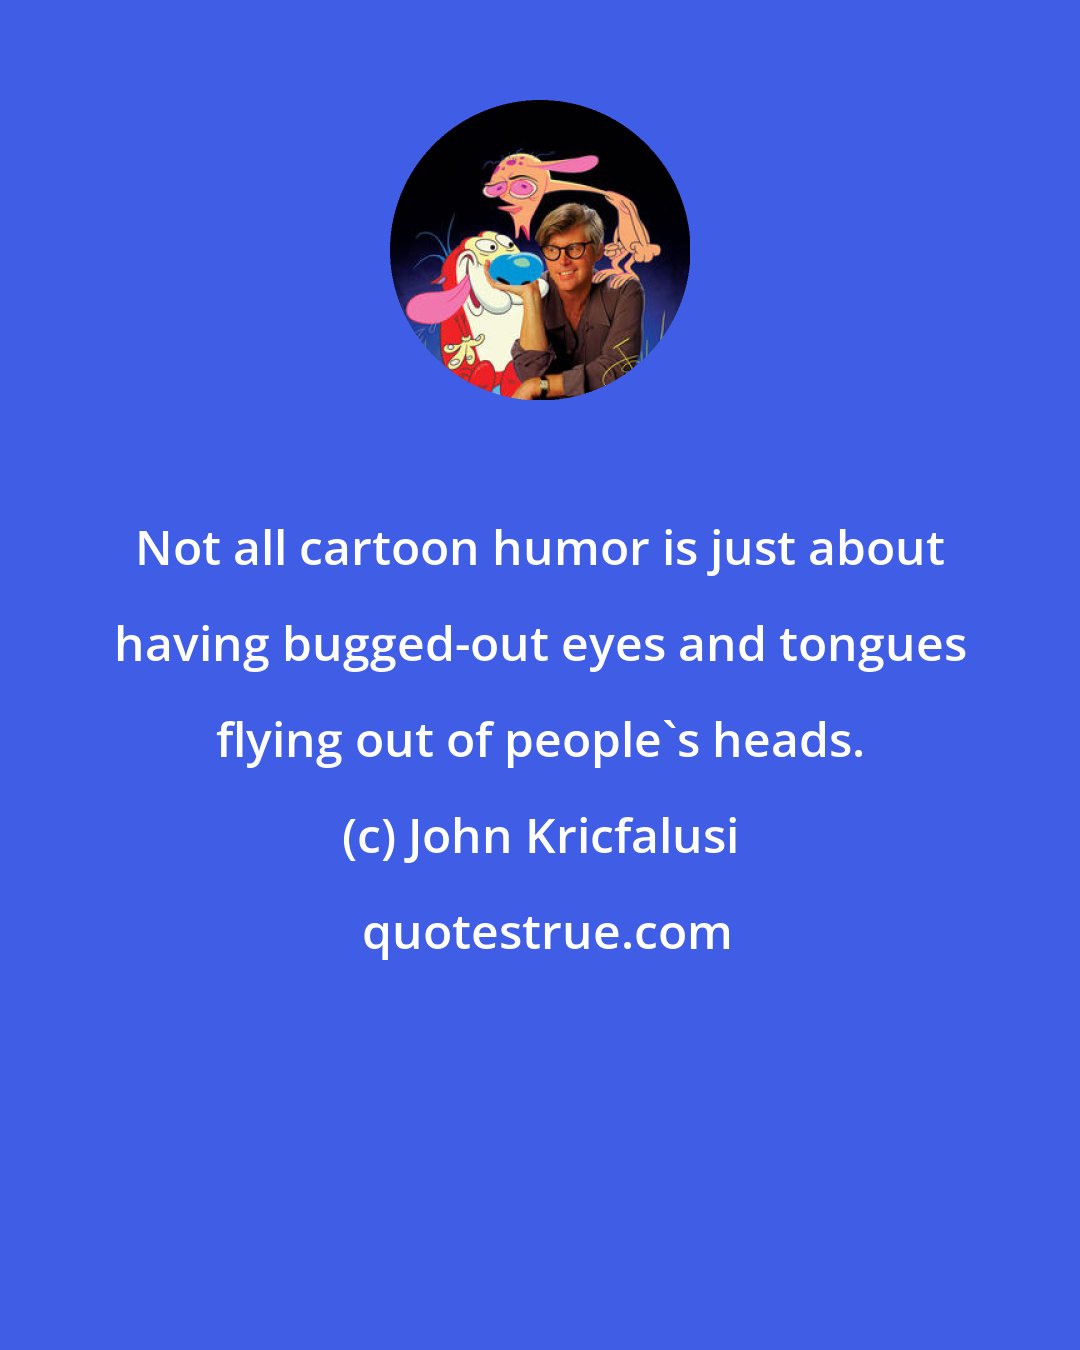 John Kricfalusi: Not all cartoon humor is just about having bugged-out eyes and tongues flying out of people's heads.